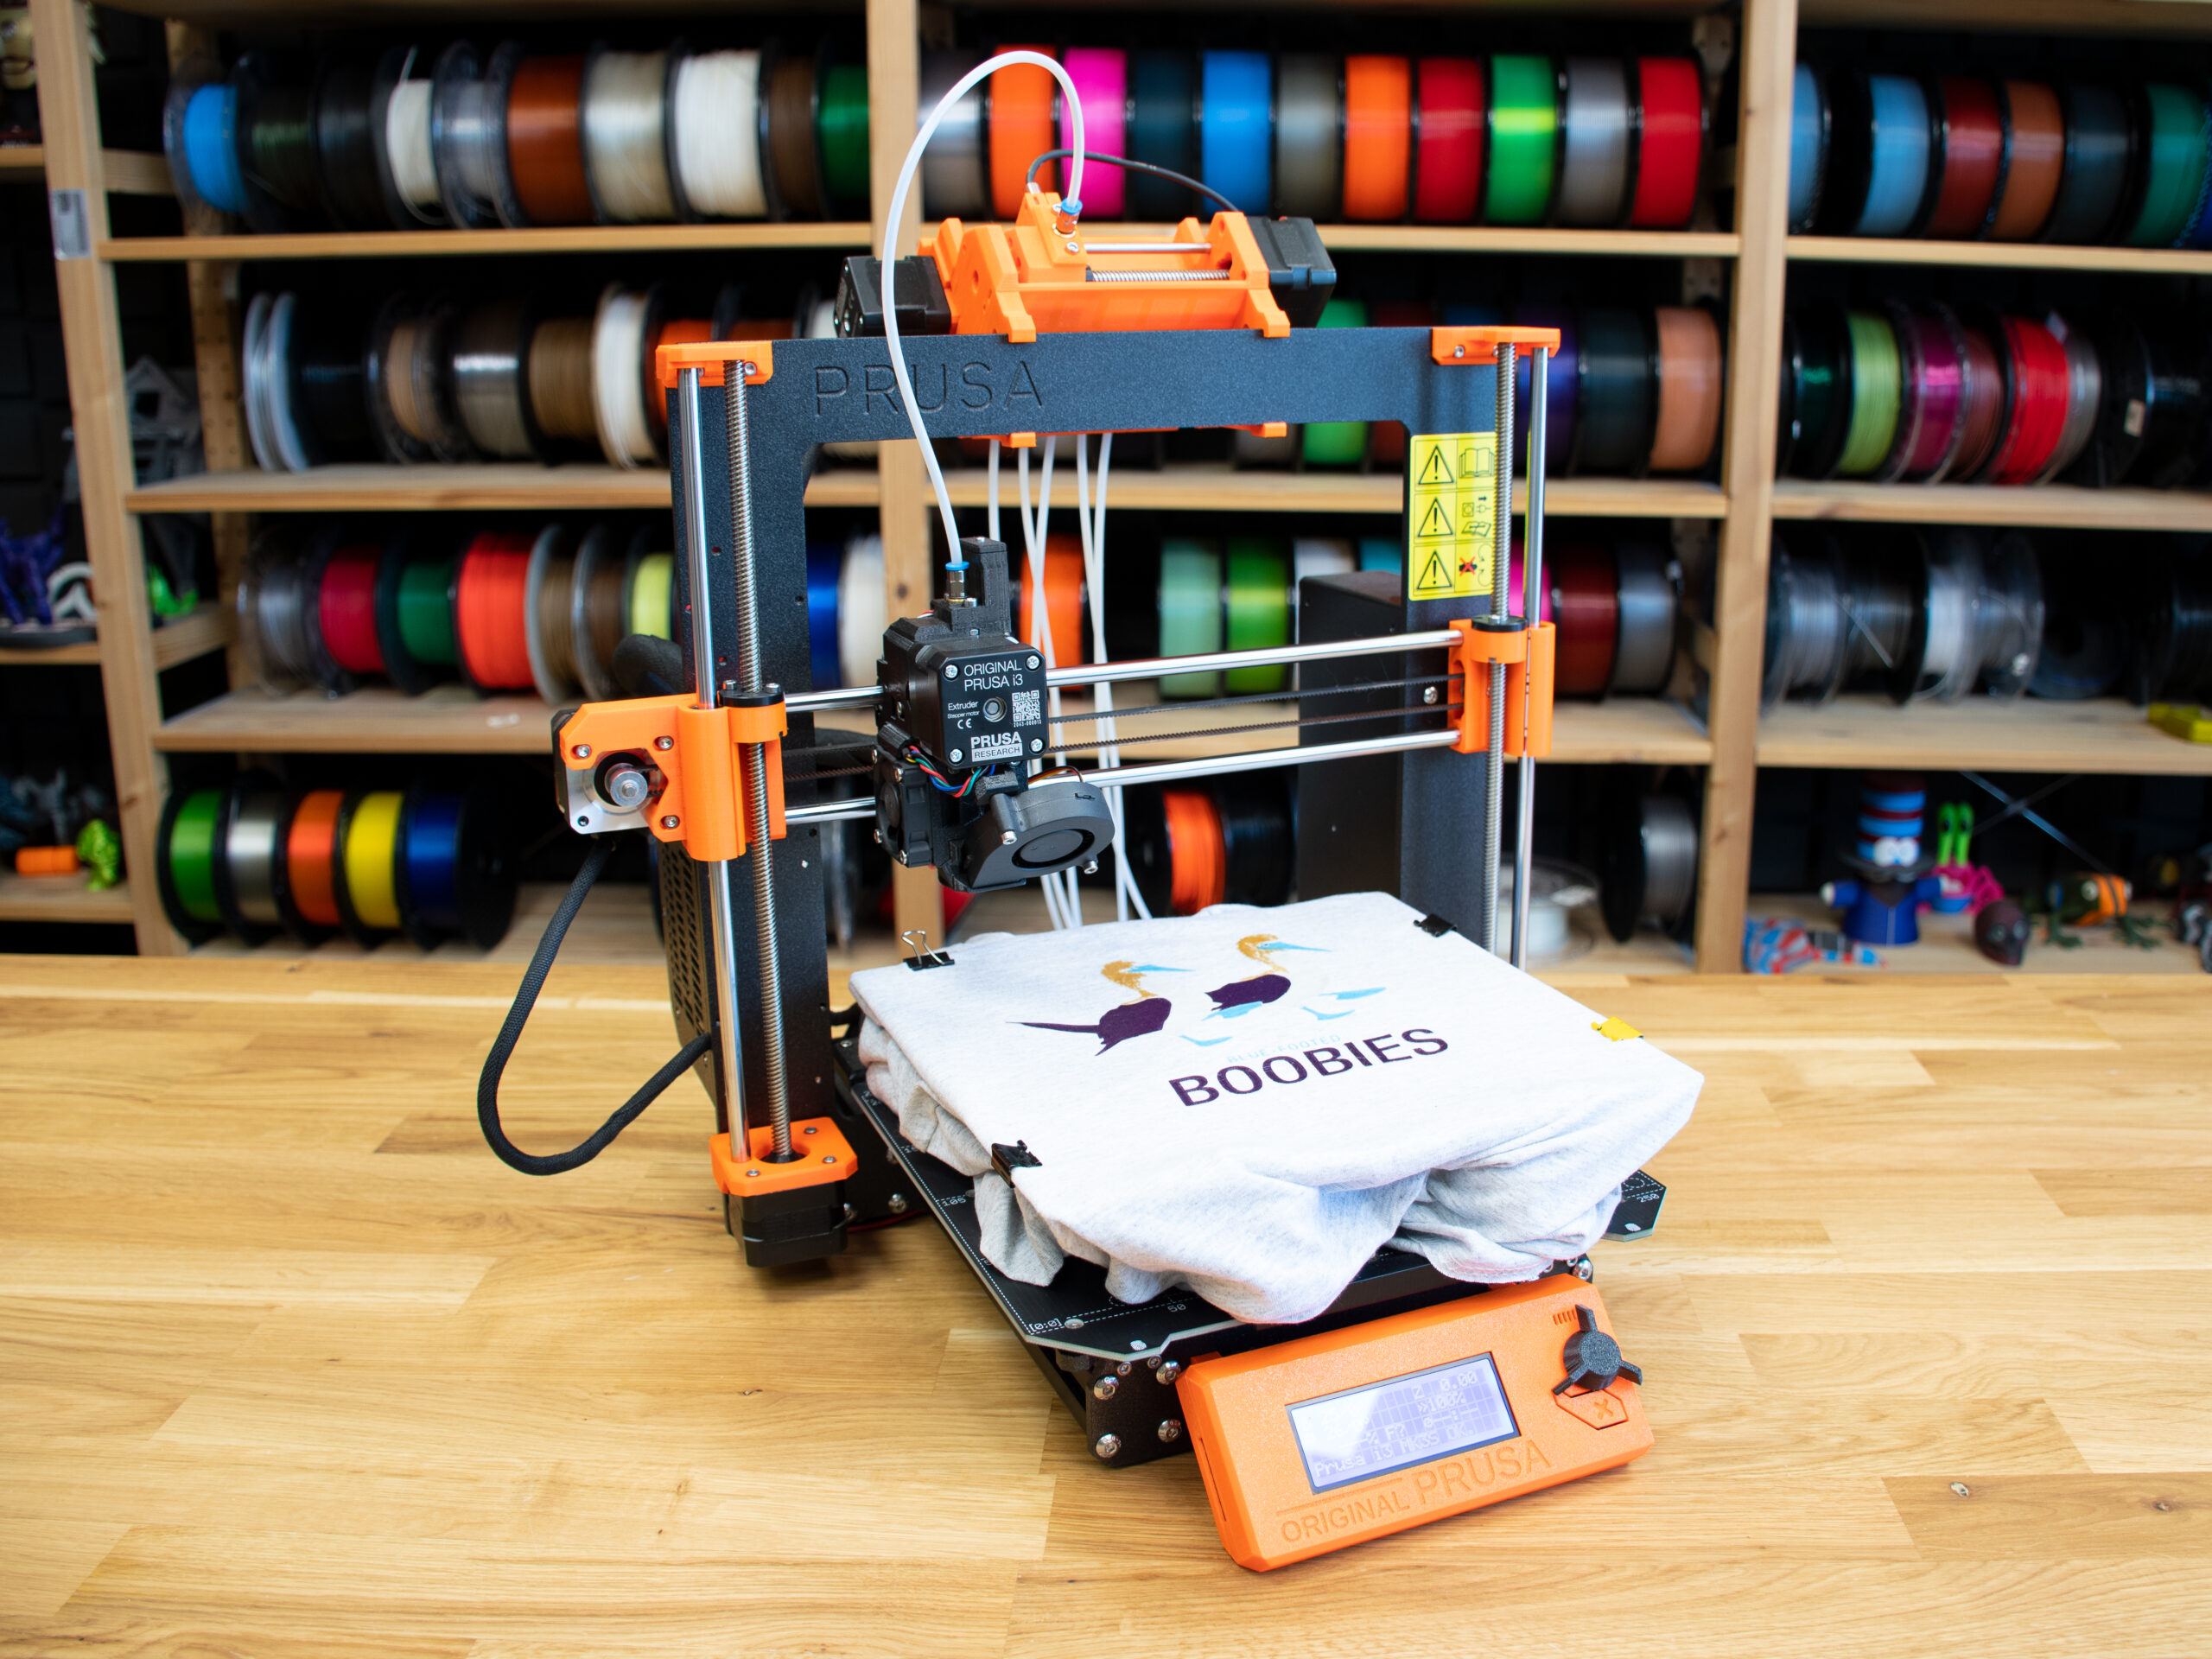 Print your own clothes